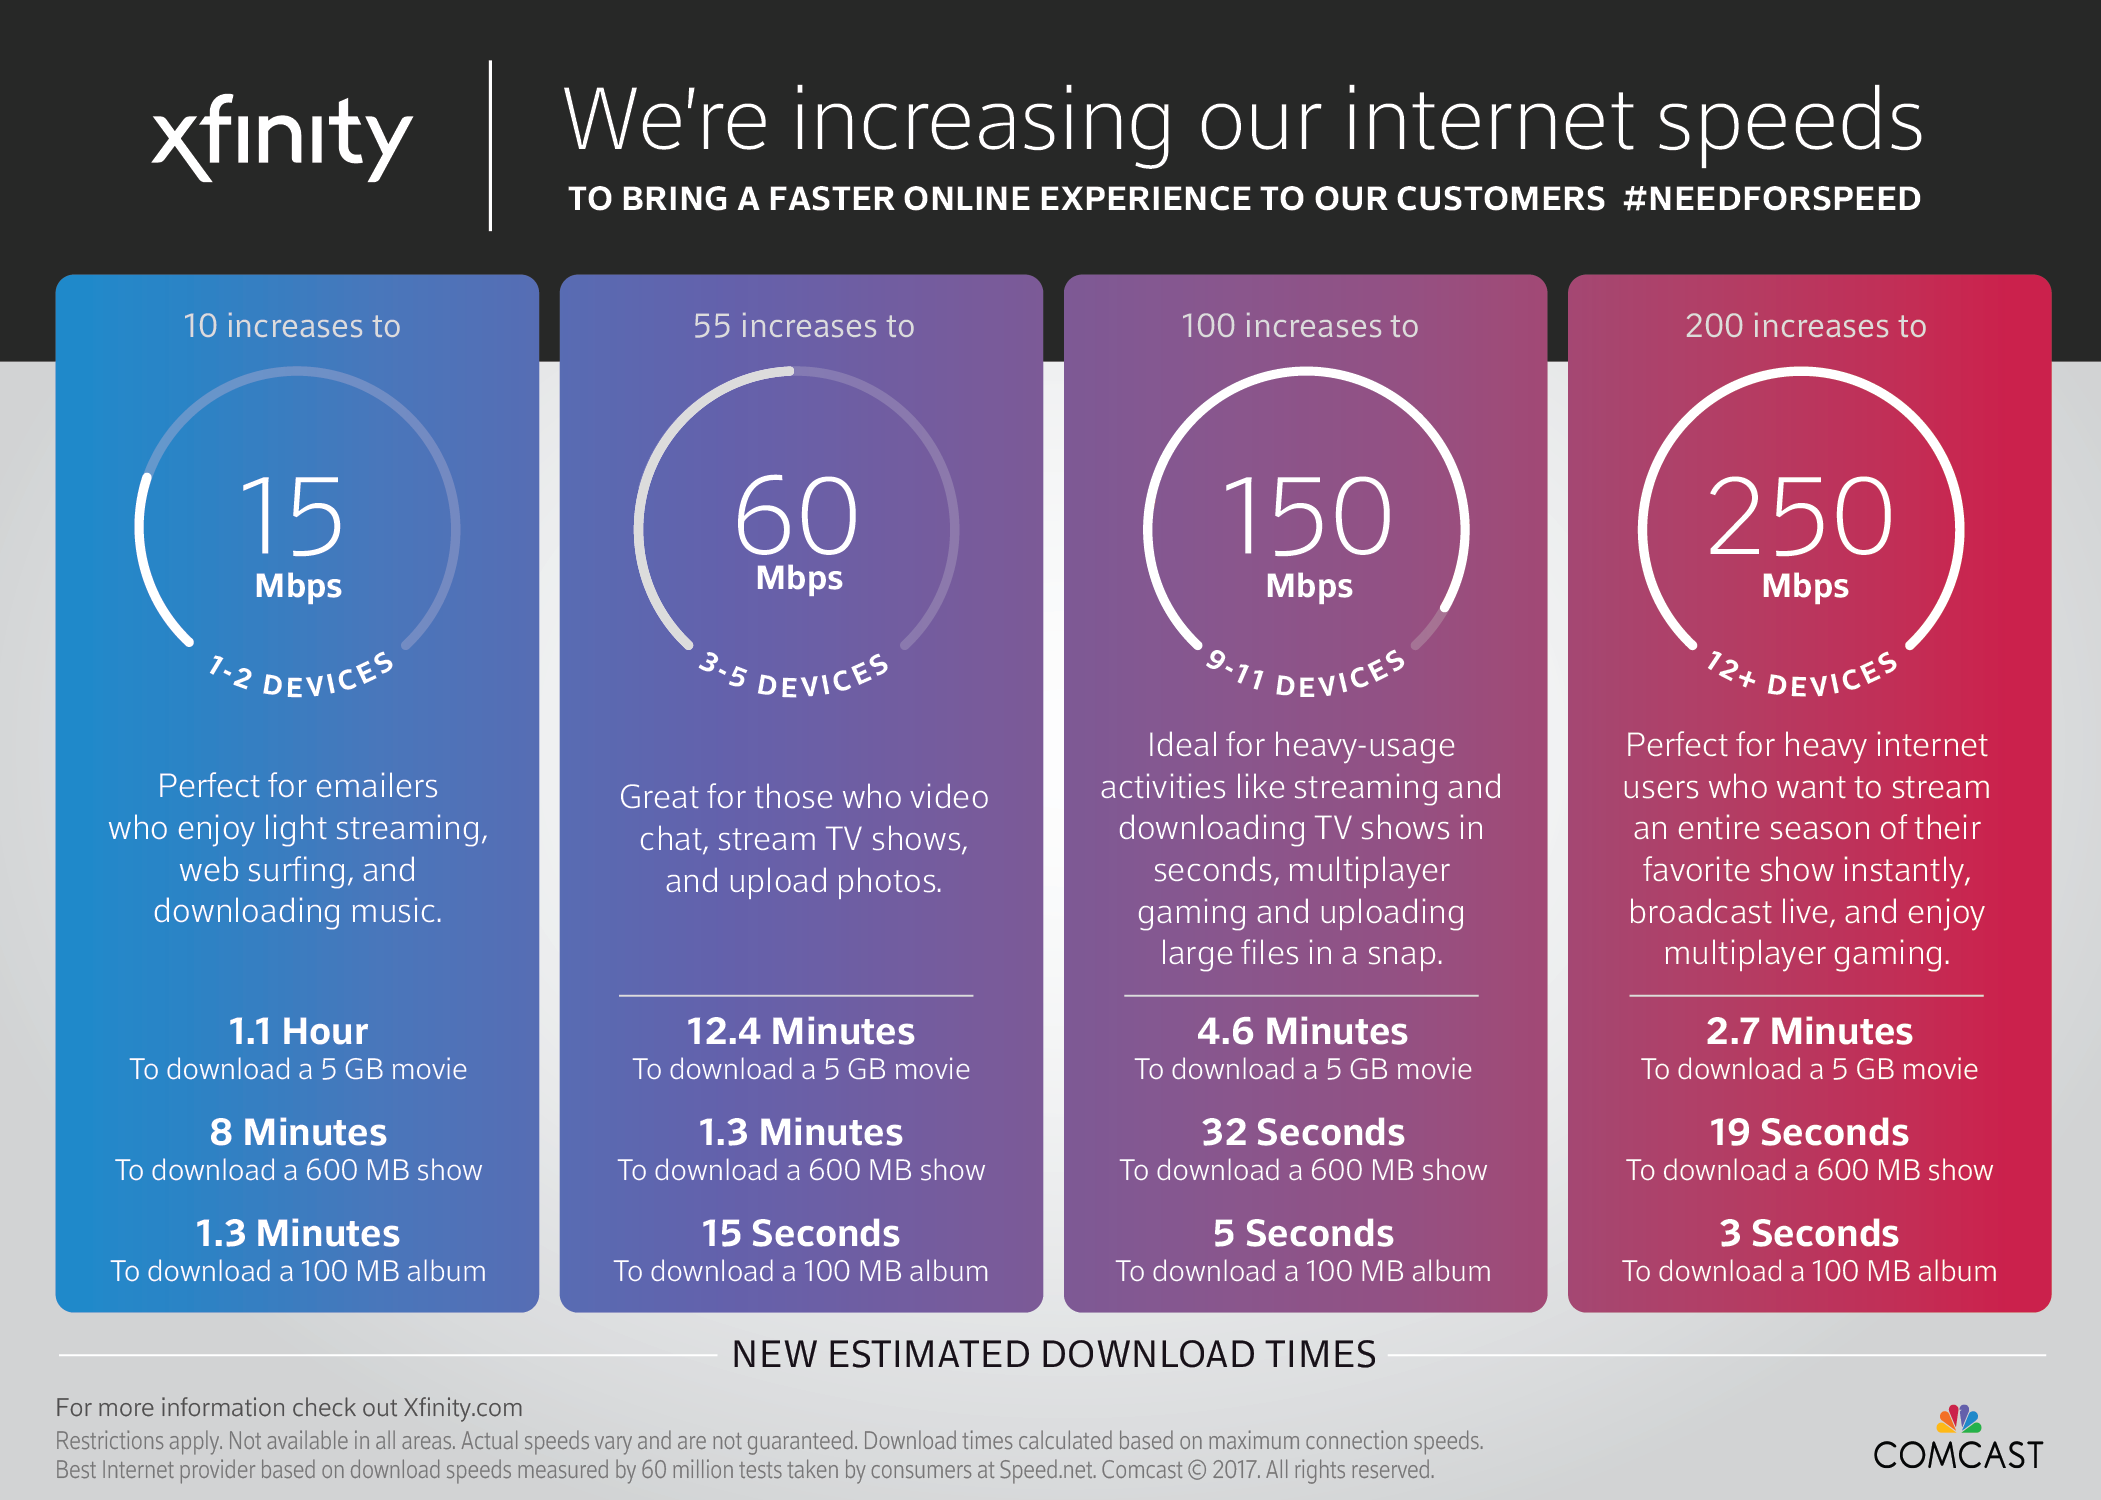 Comcast increases internet speeds at no additional cost for customers